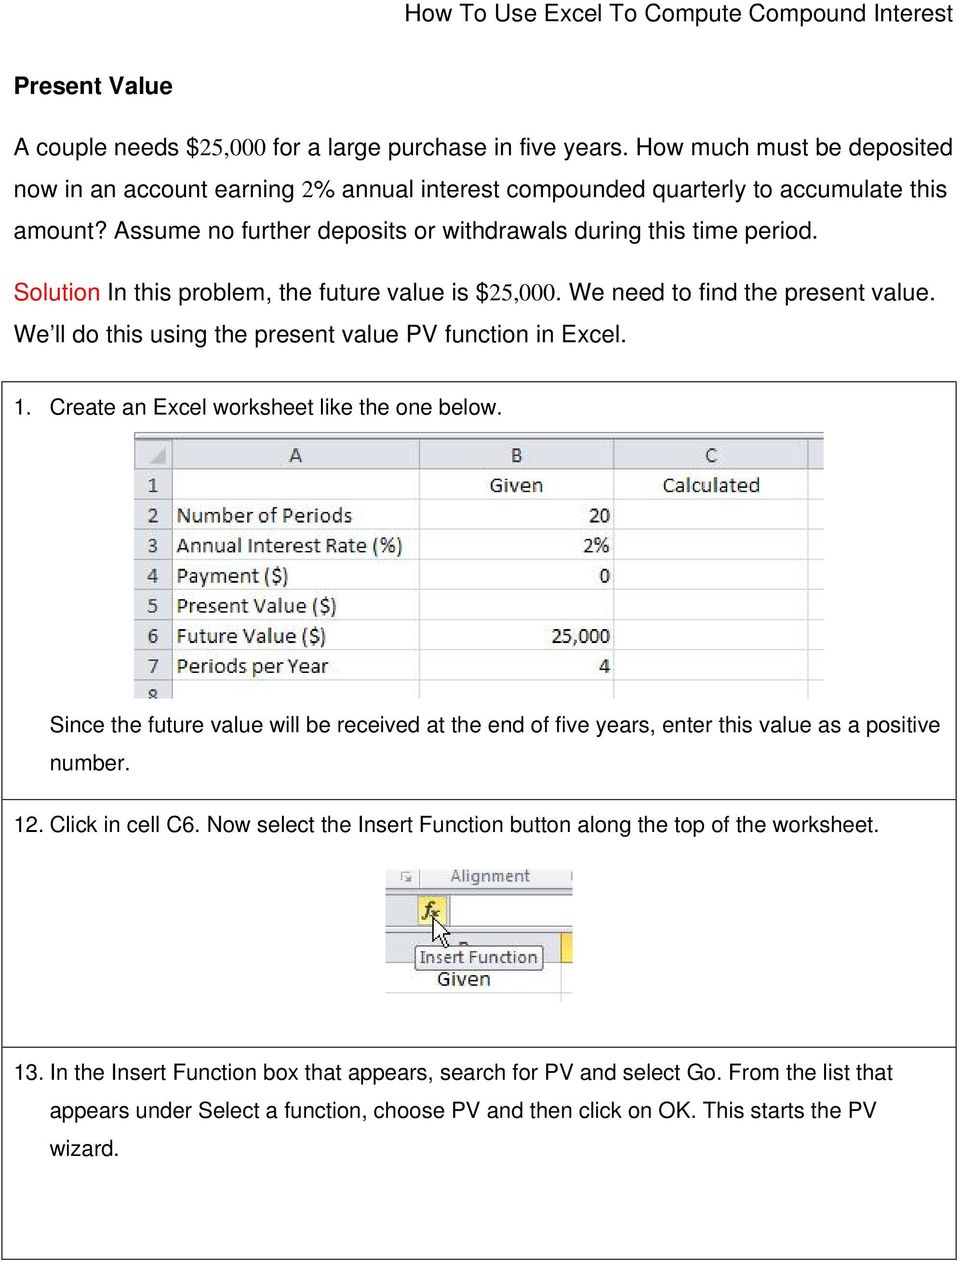 We ll do this using the present value PV function in Excel. 1. Create an Excel worksheet like the one below.